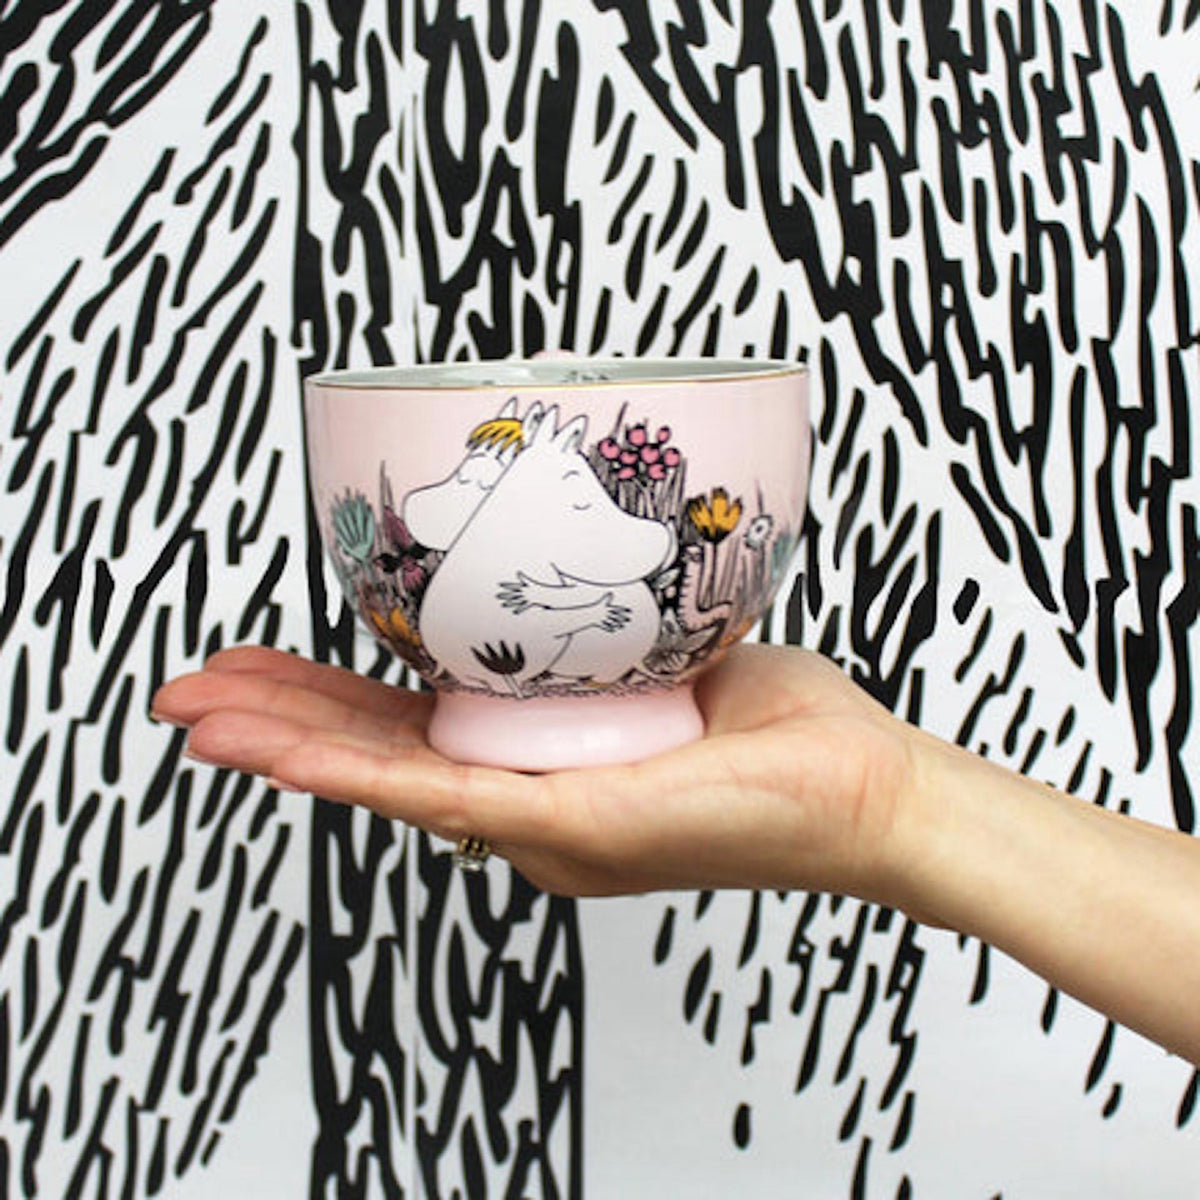 Moomin Limited Edition Love Cup